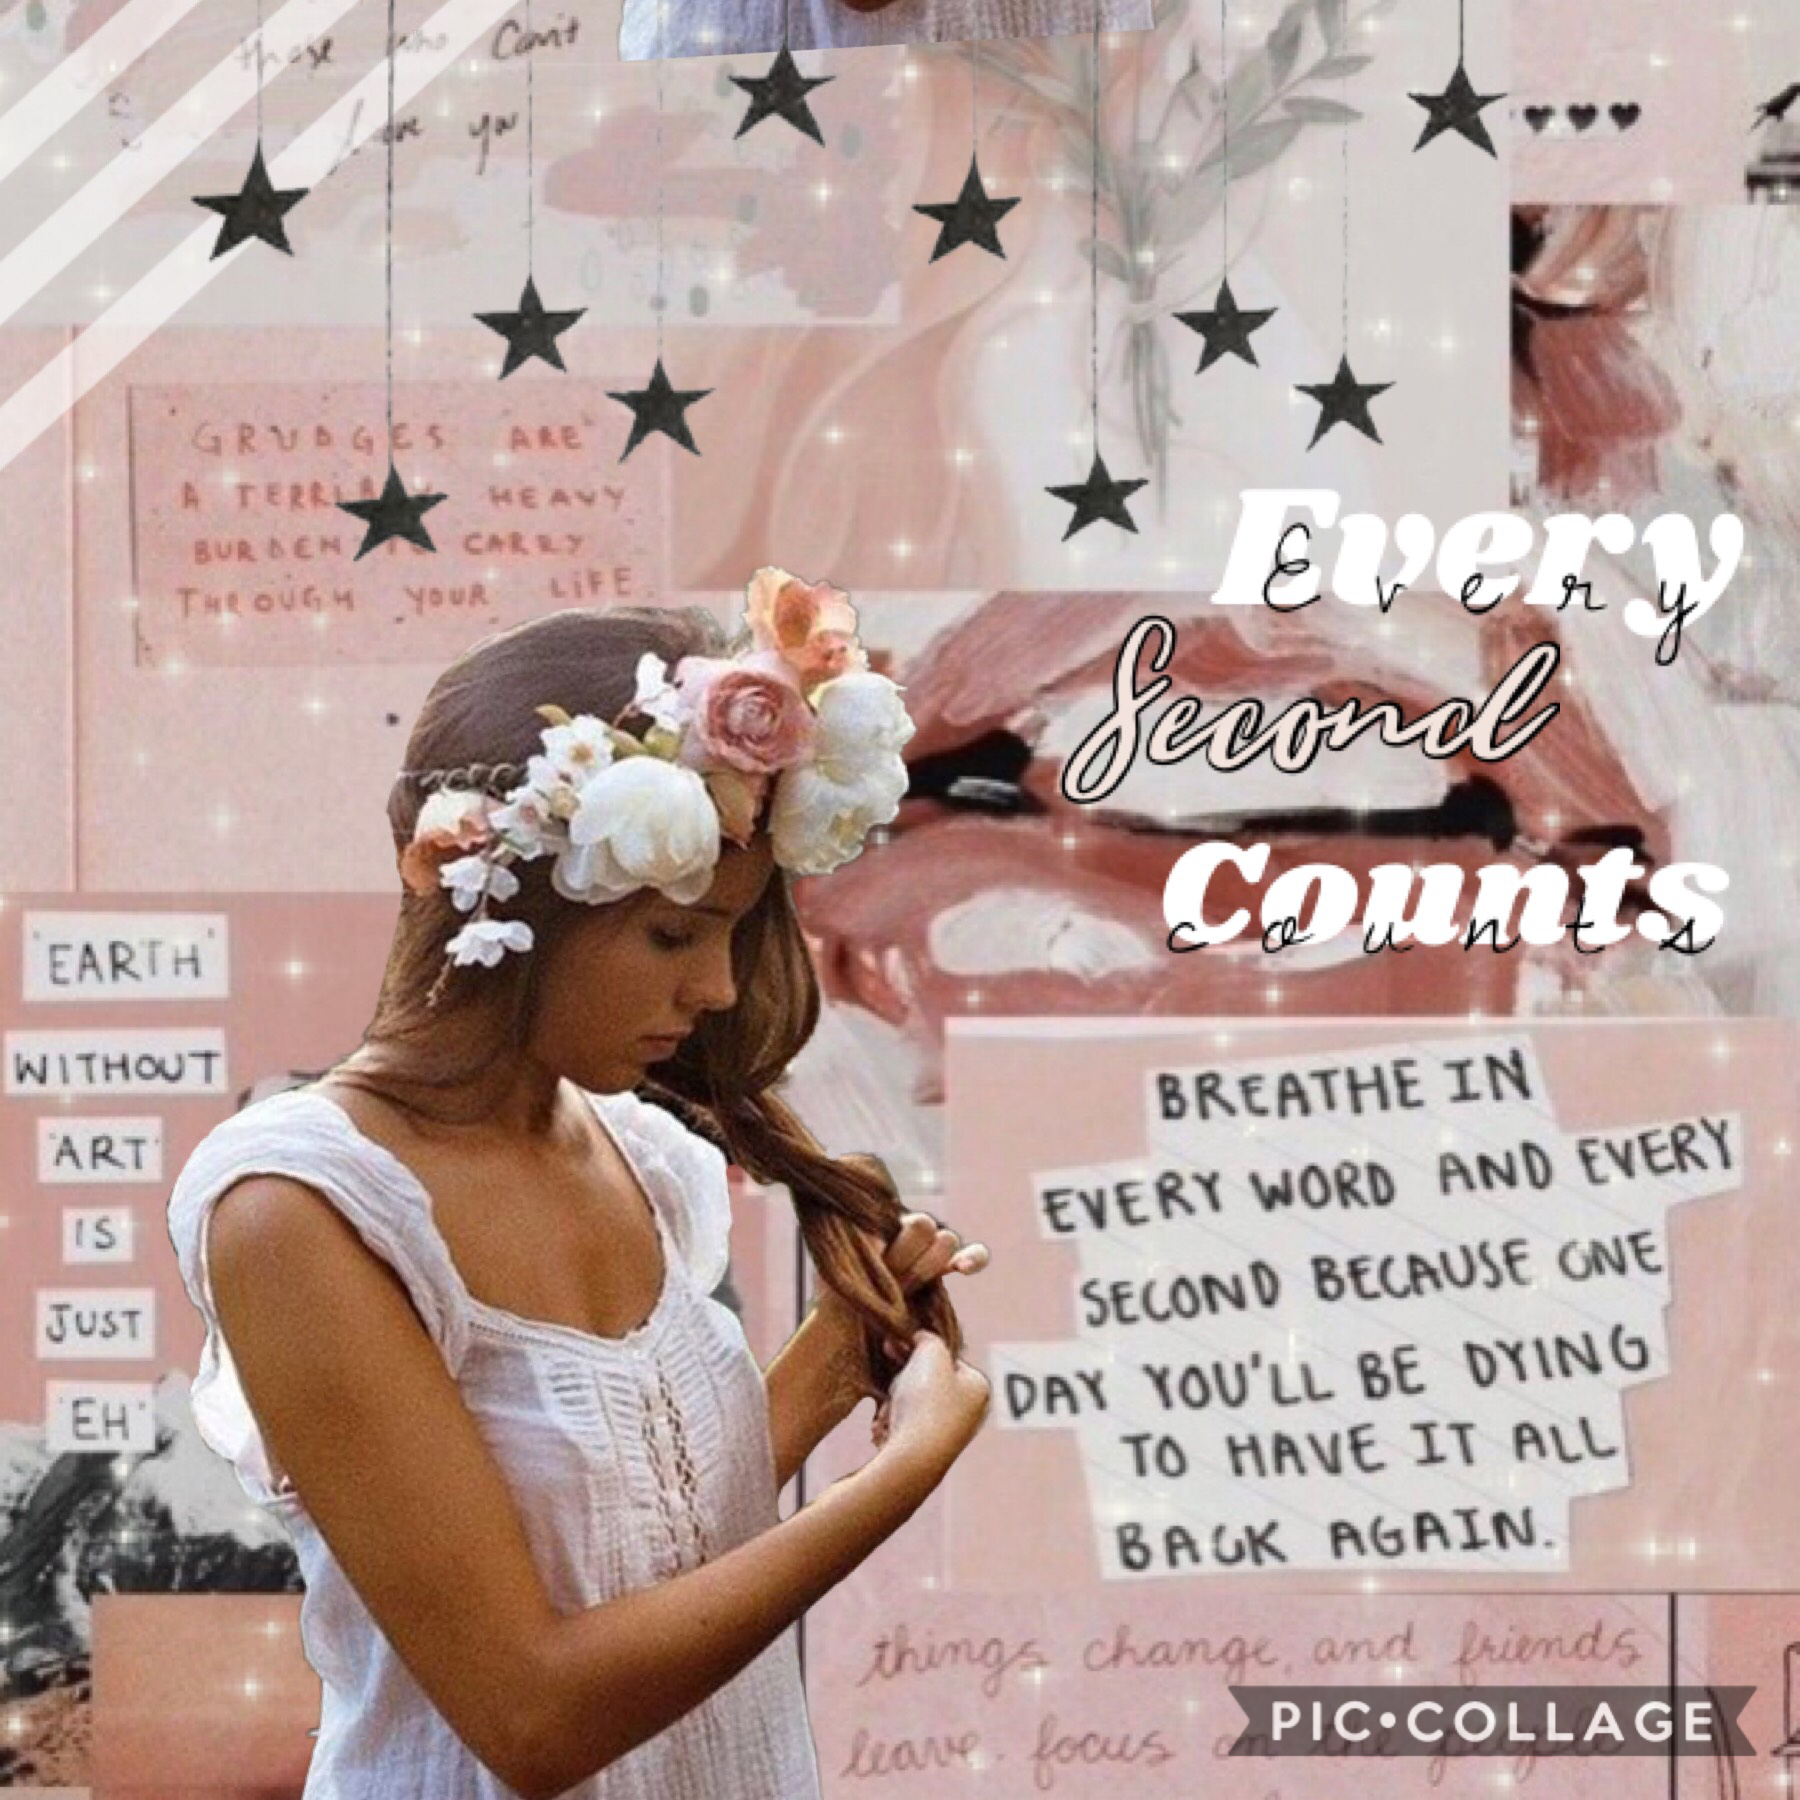 -🖤Every second counts🖤-